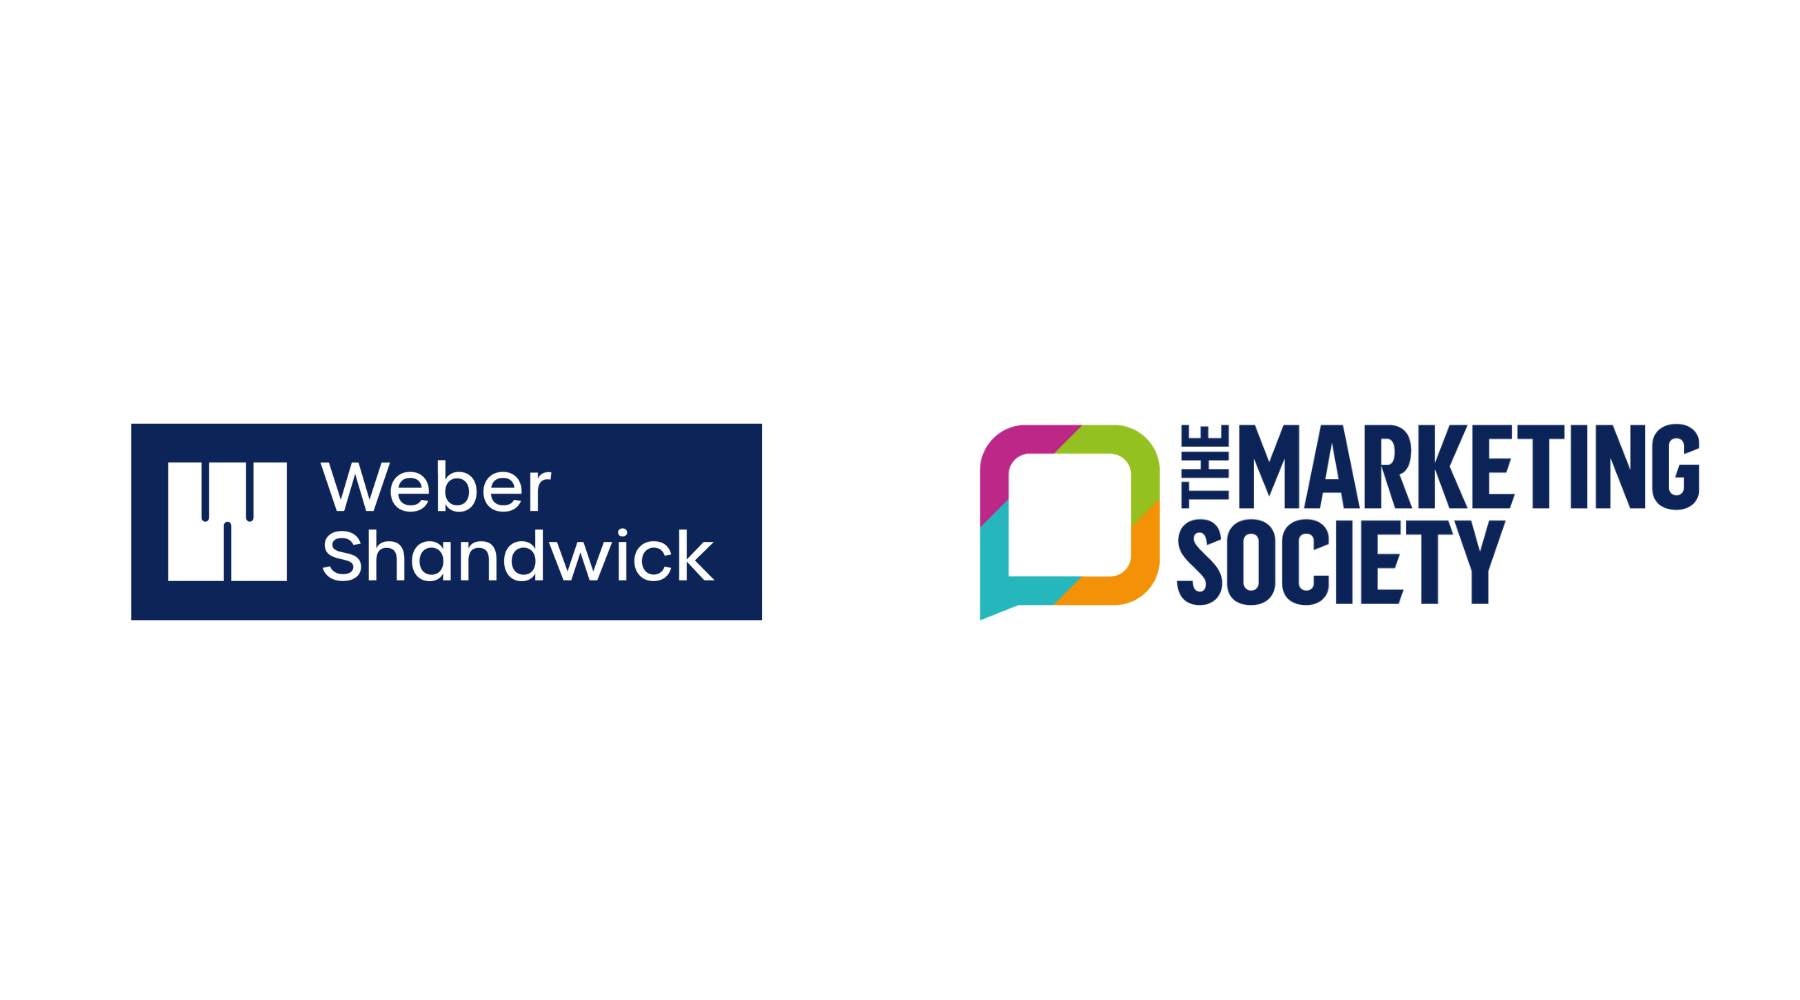 The Marketing Society Extends its Gender Equality Campaign - ‘Think Equal’ with Weber Shandwick